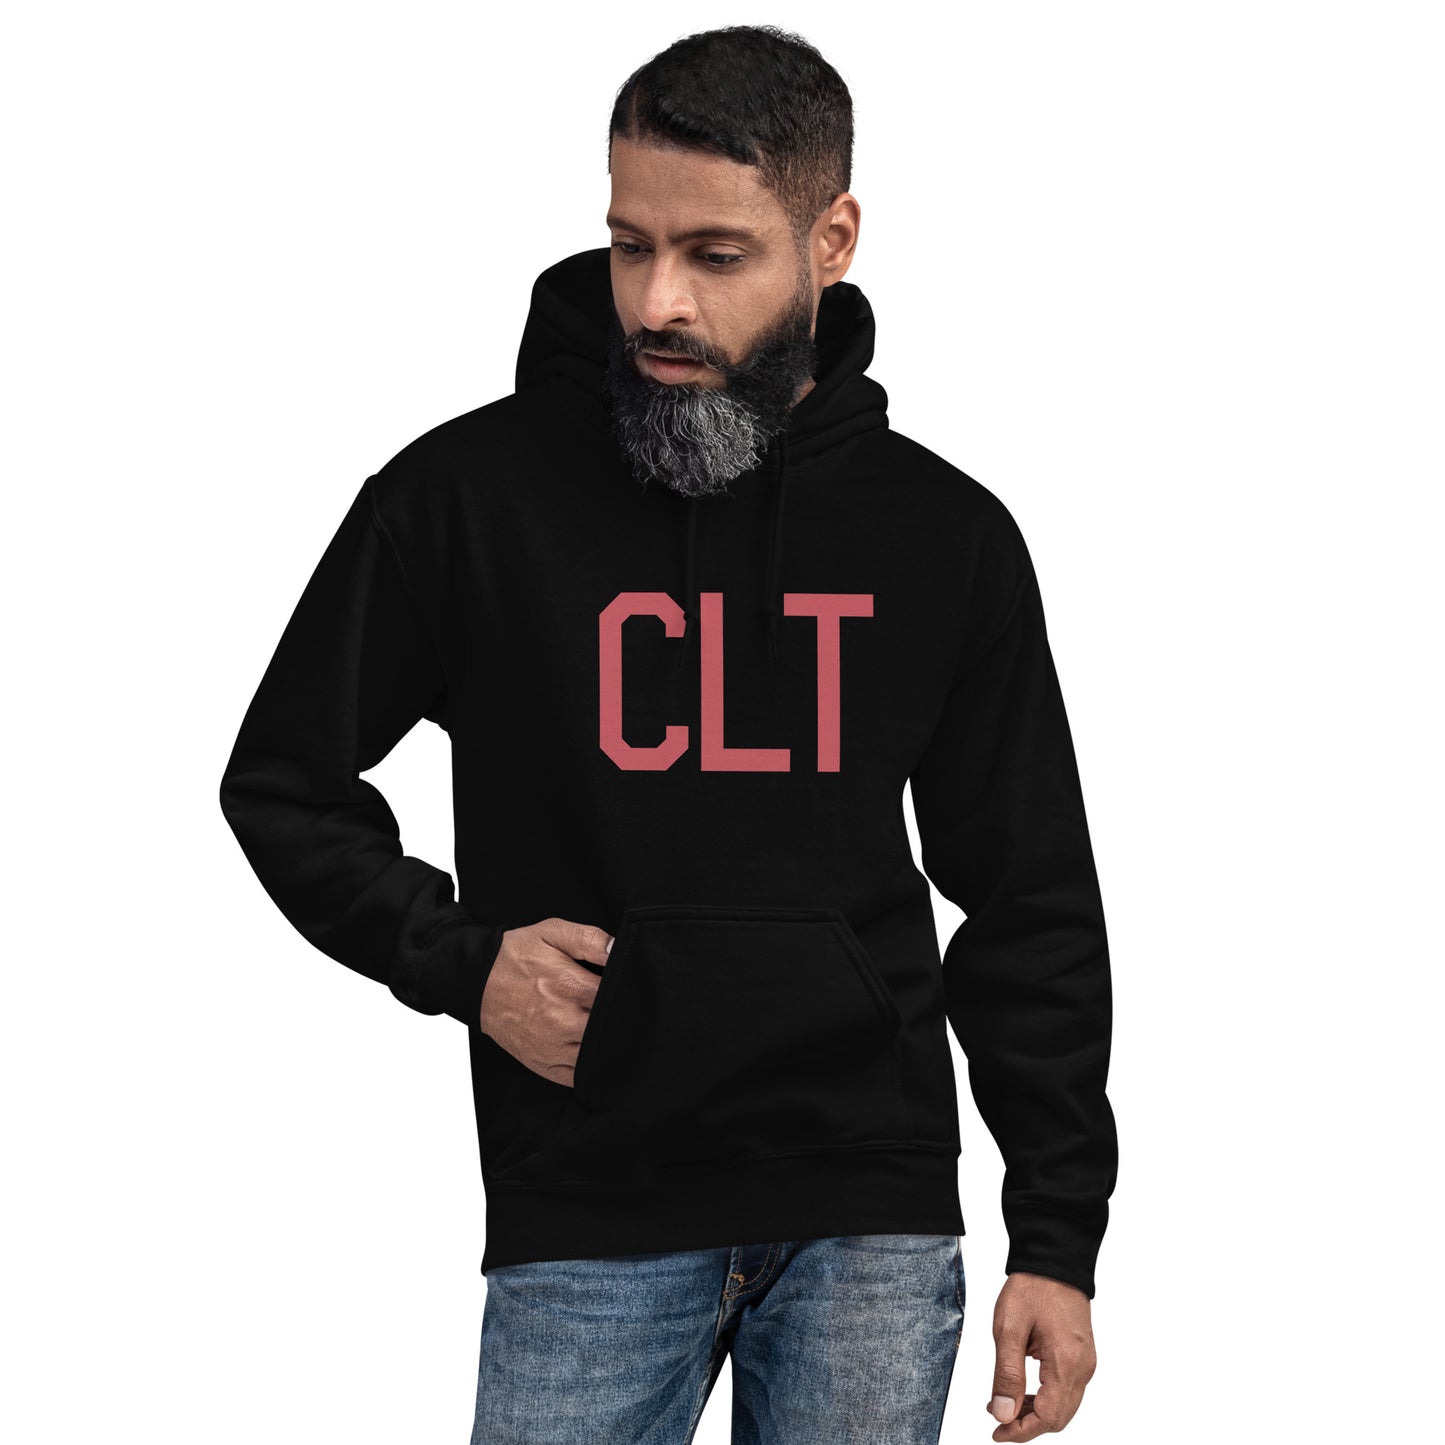 Aviation Enthusiast Hoodie - Deep Pink Graphic • CLT Charlotte • YHM Designs - Image 05